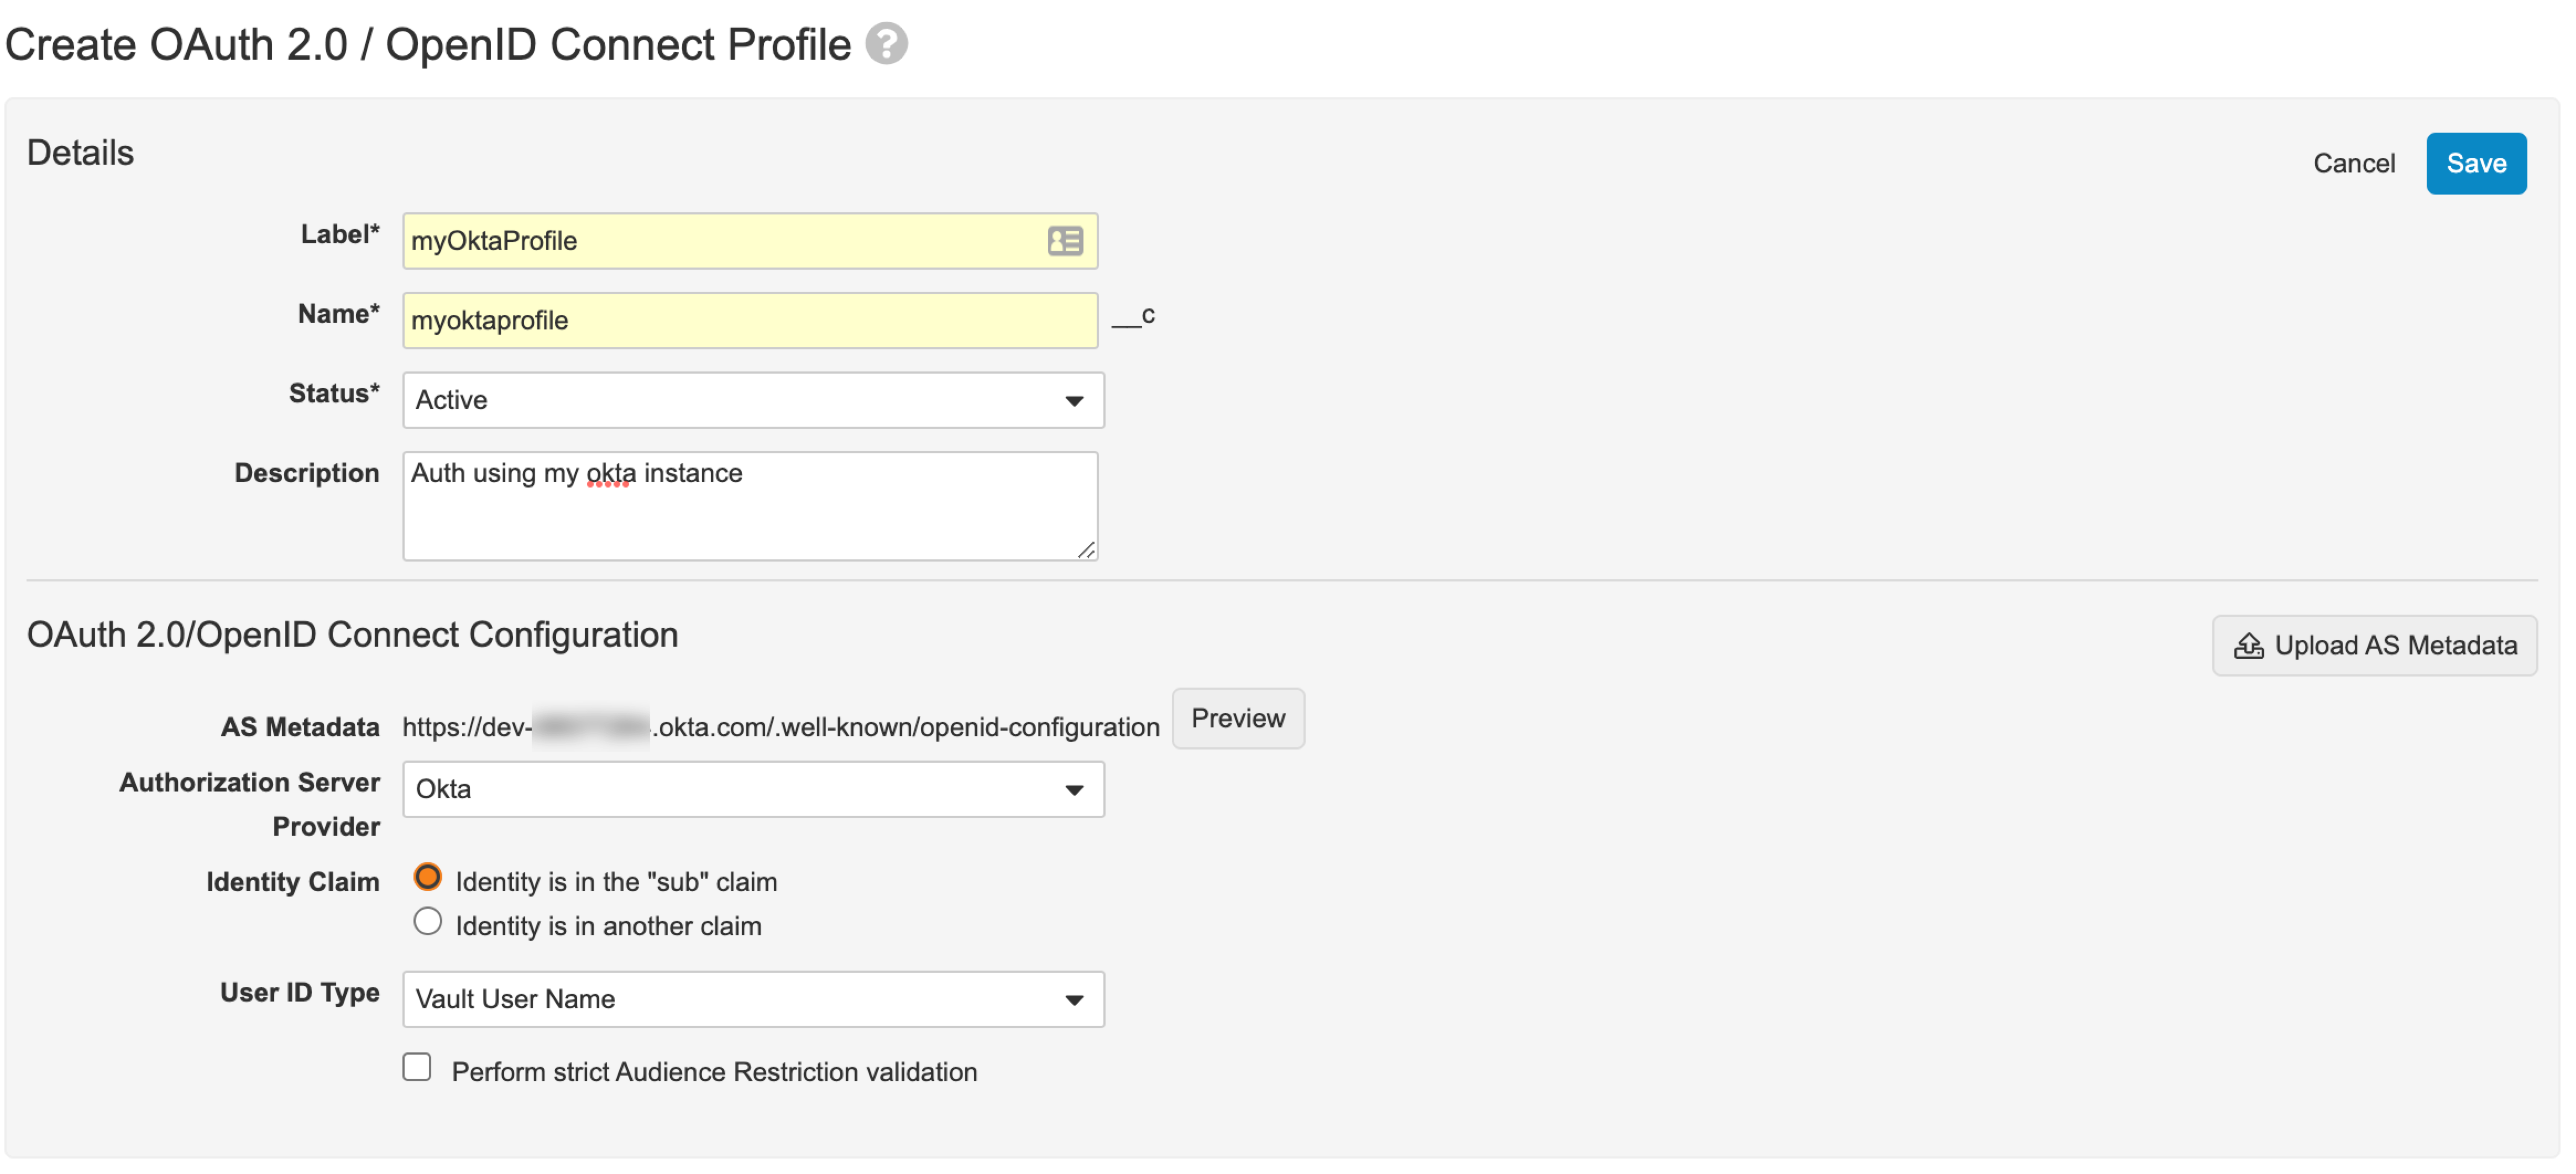 OAuth 2.0 / OpenID Connect Profile configuration window with completed fields from the steps above